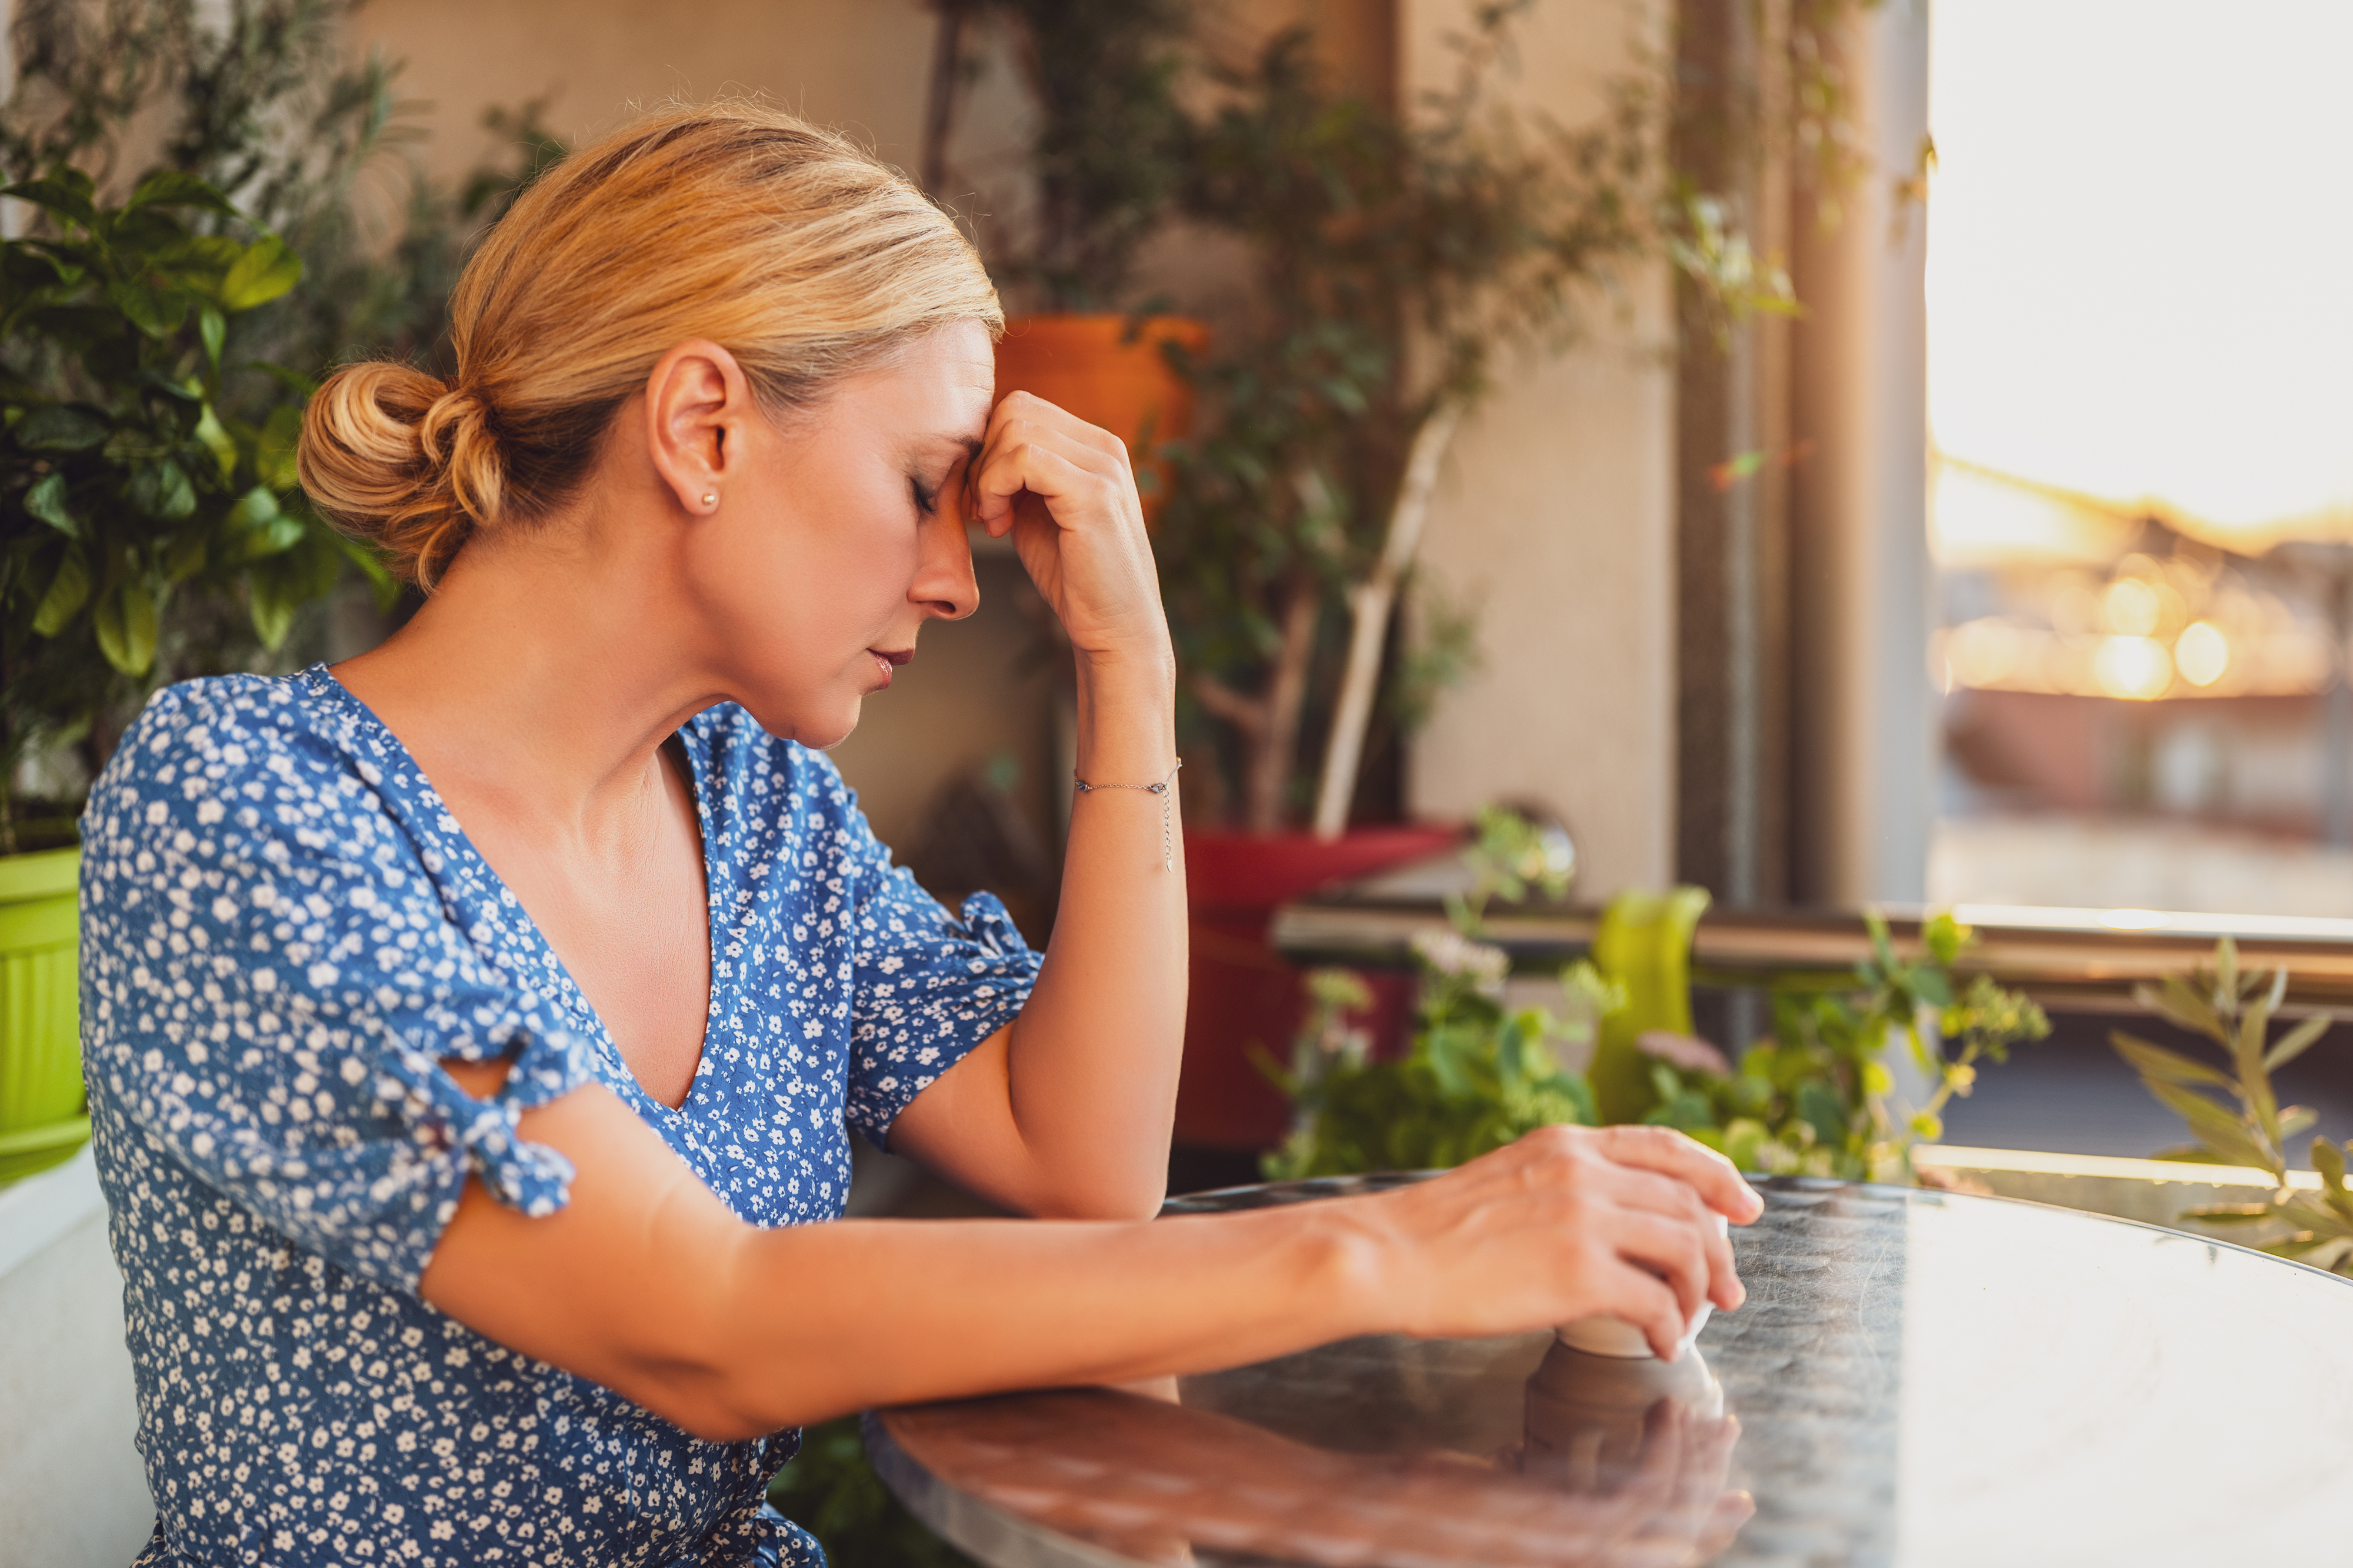 Woman at a table appears stressed or contemplative, surrounded by plants